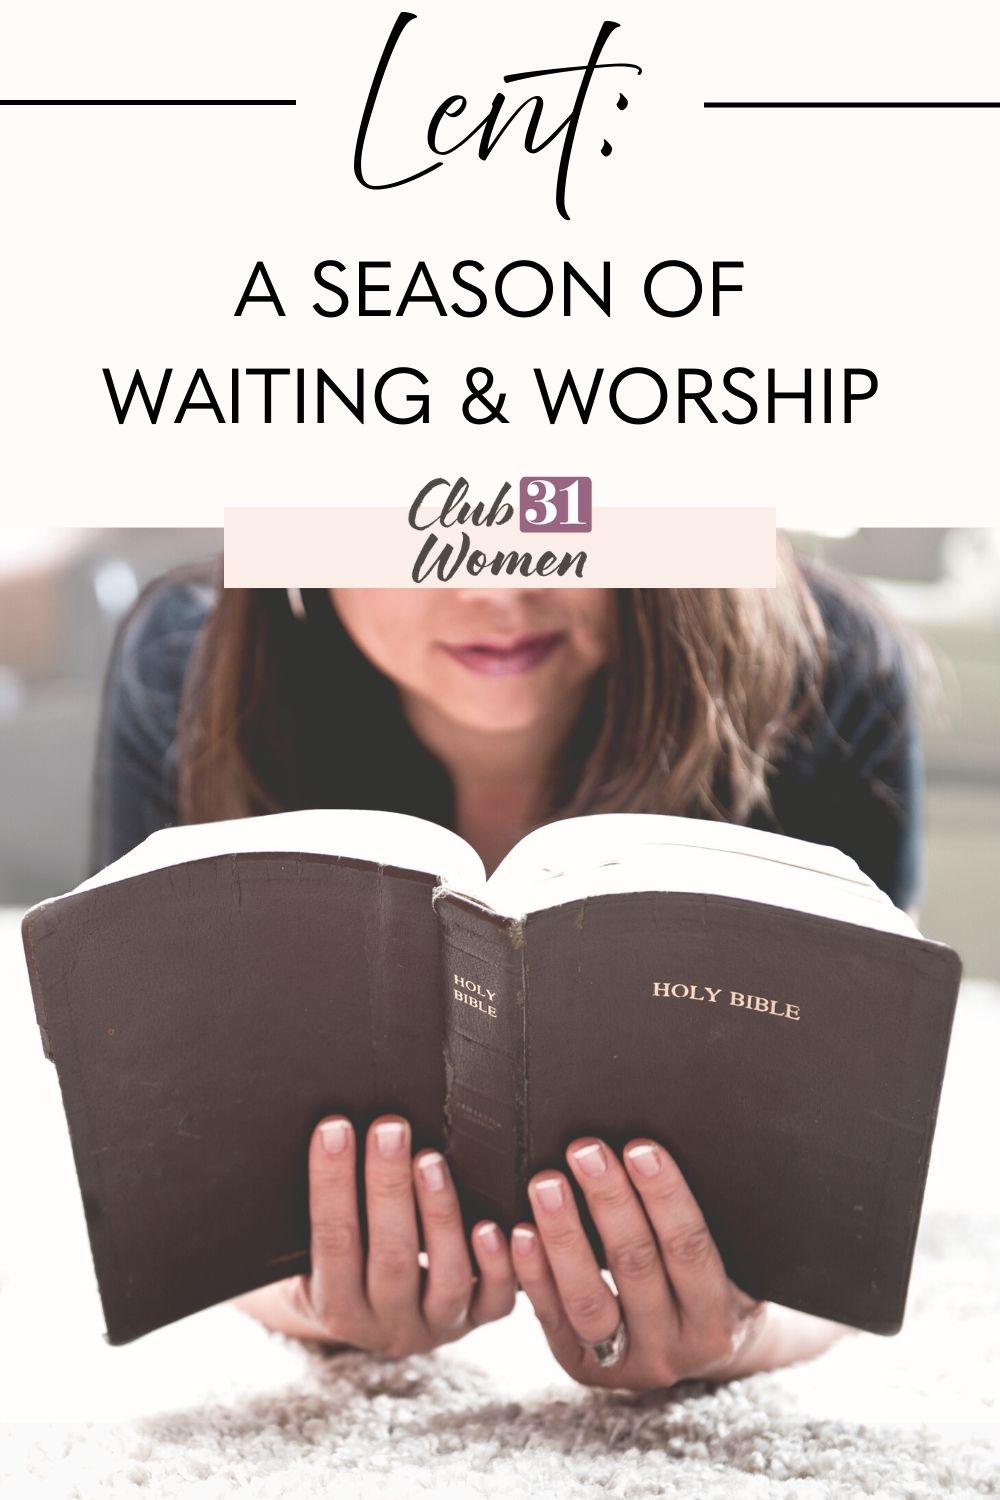 Lent can be a special time if you are intentional about observing it as a season of waiting and worship. Take time for Him. via @Club31Women